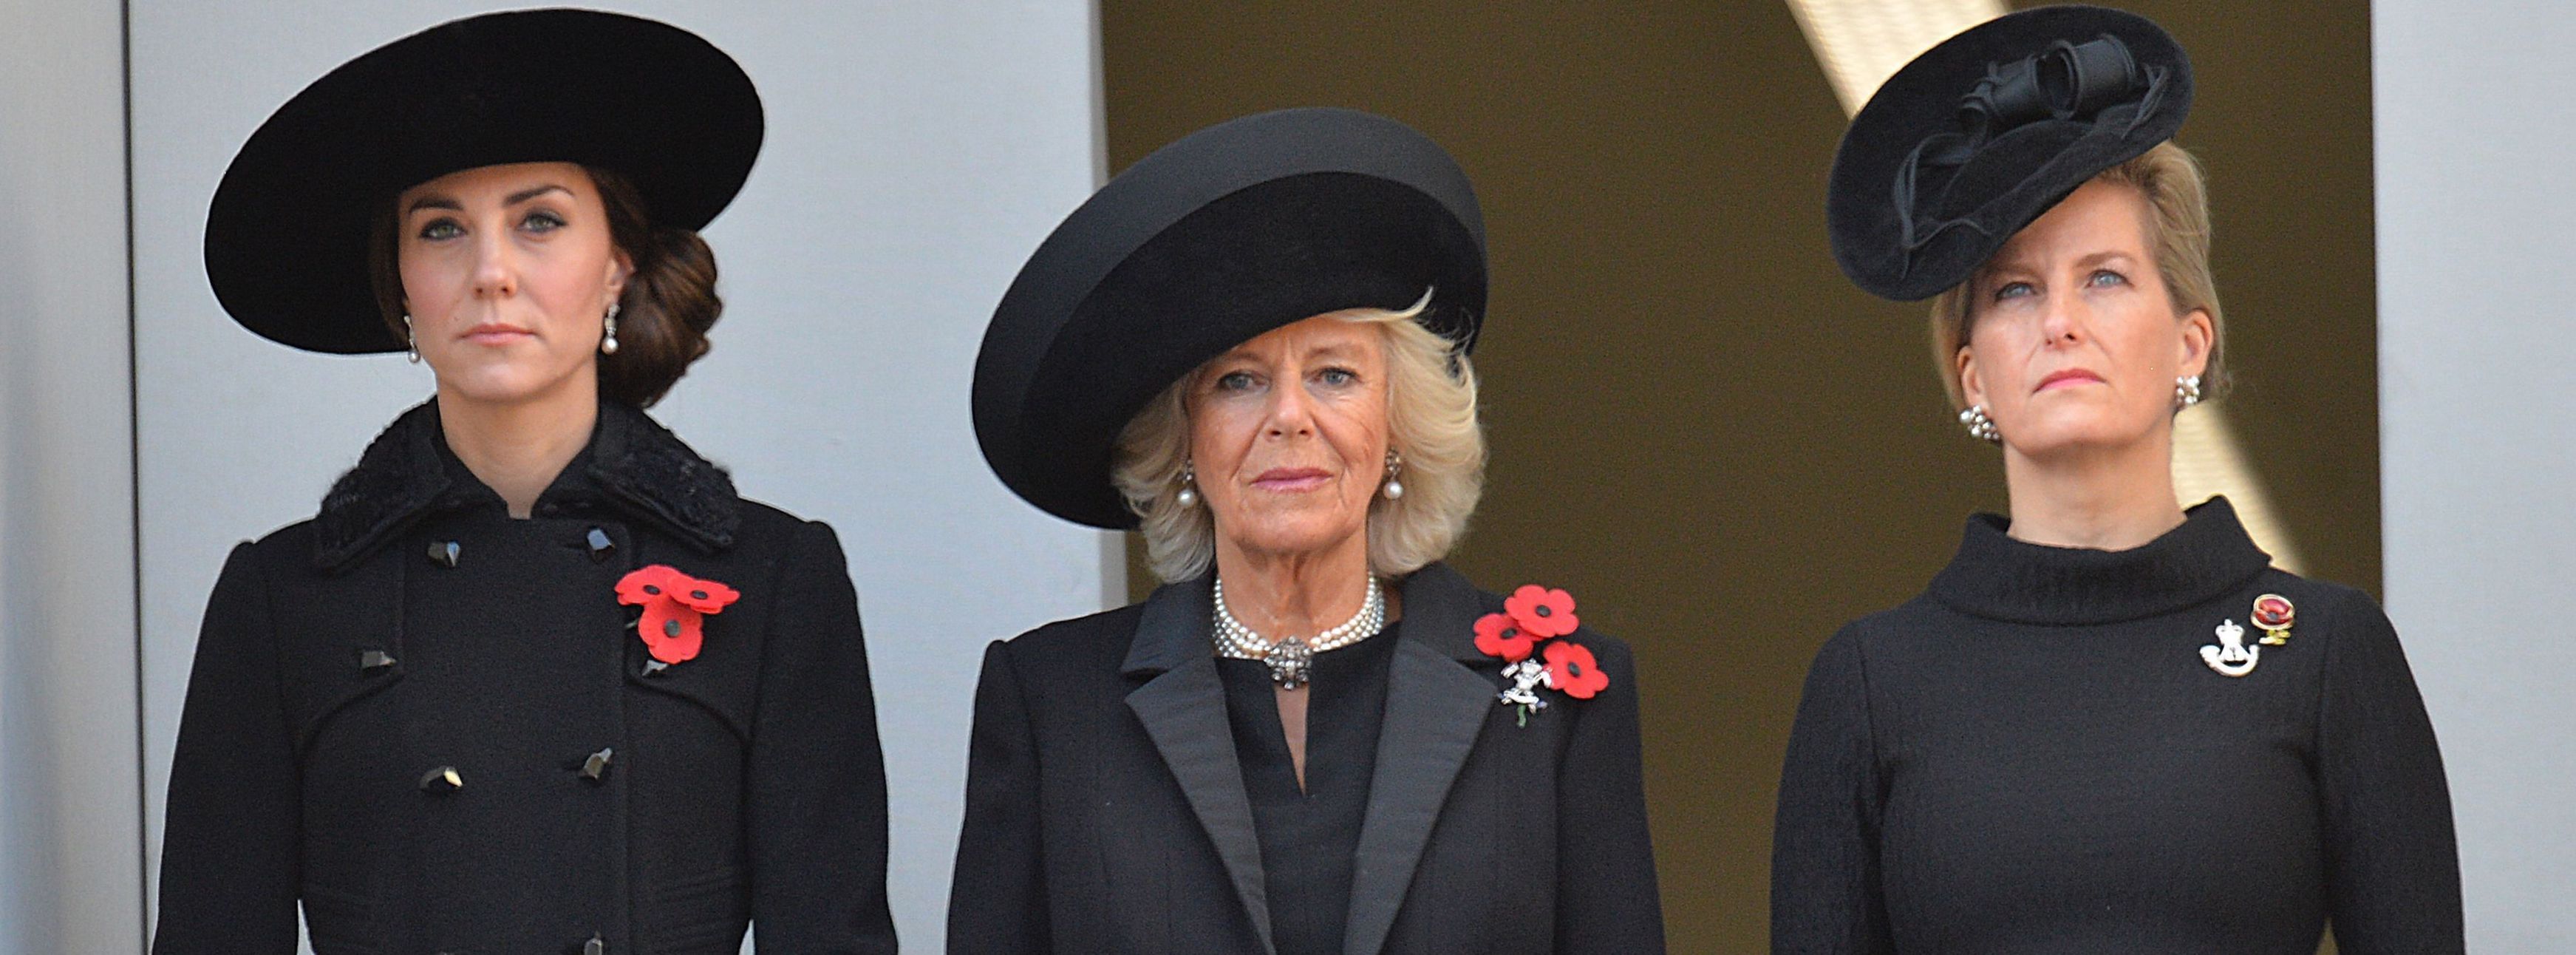 Royal Family on Remembrance Day